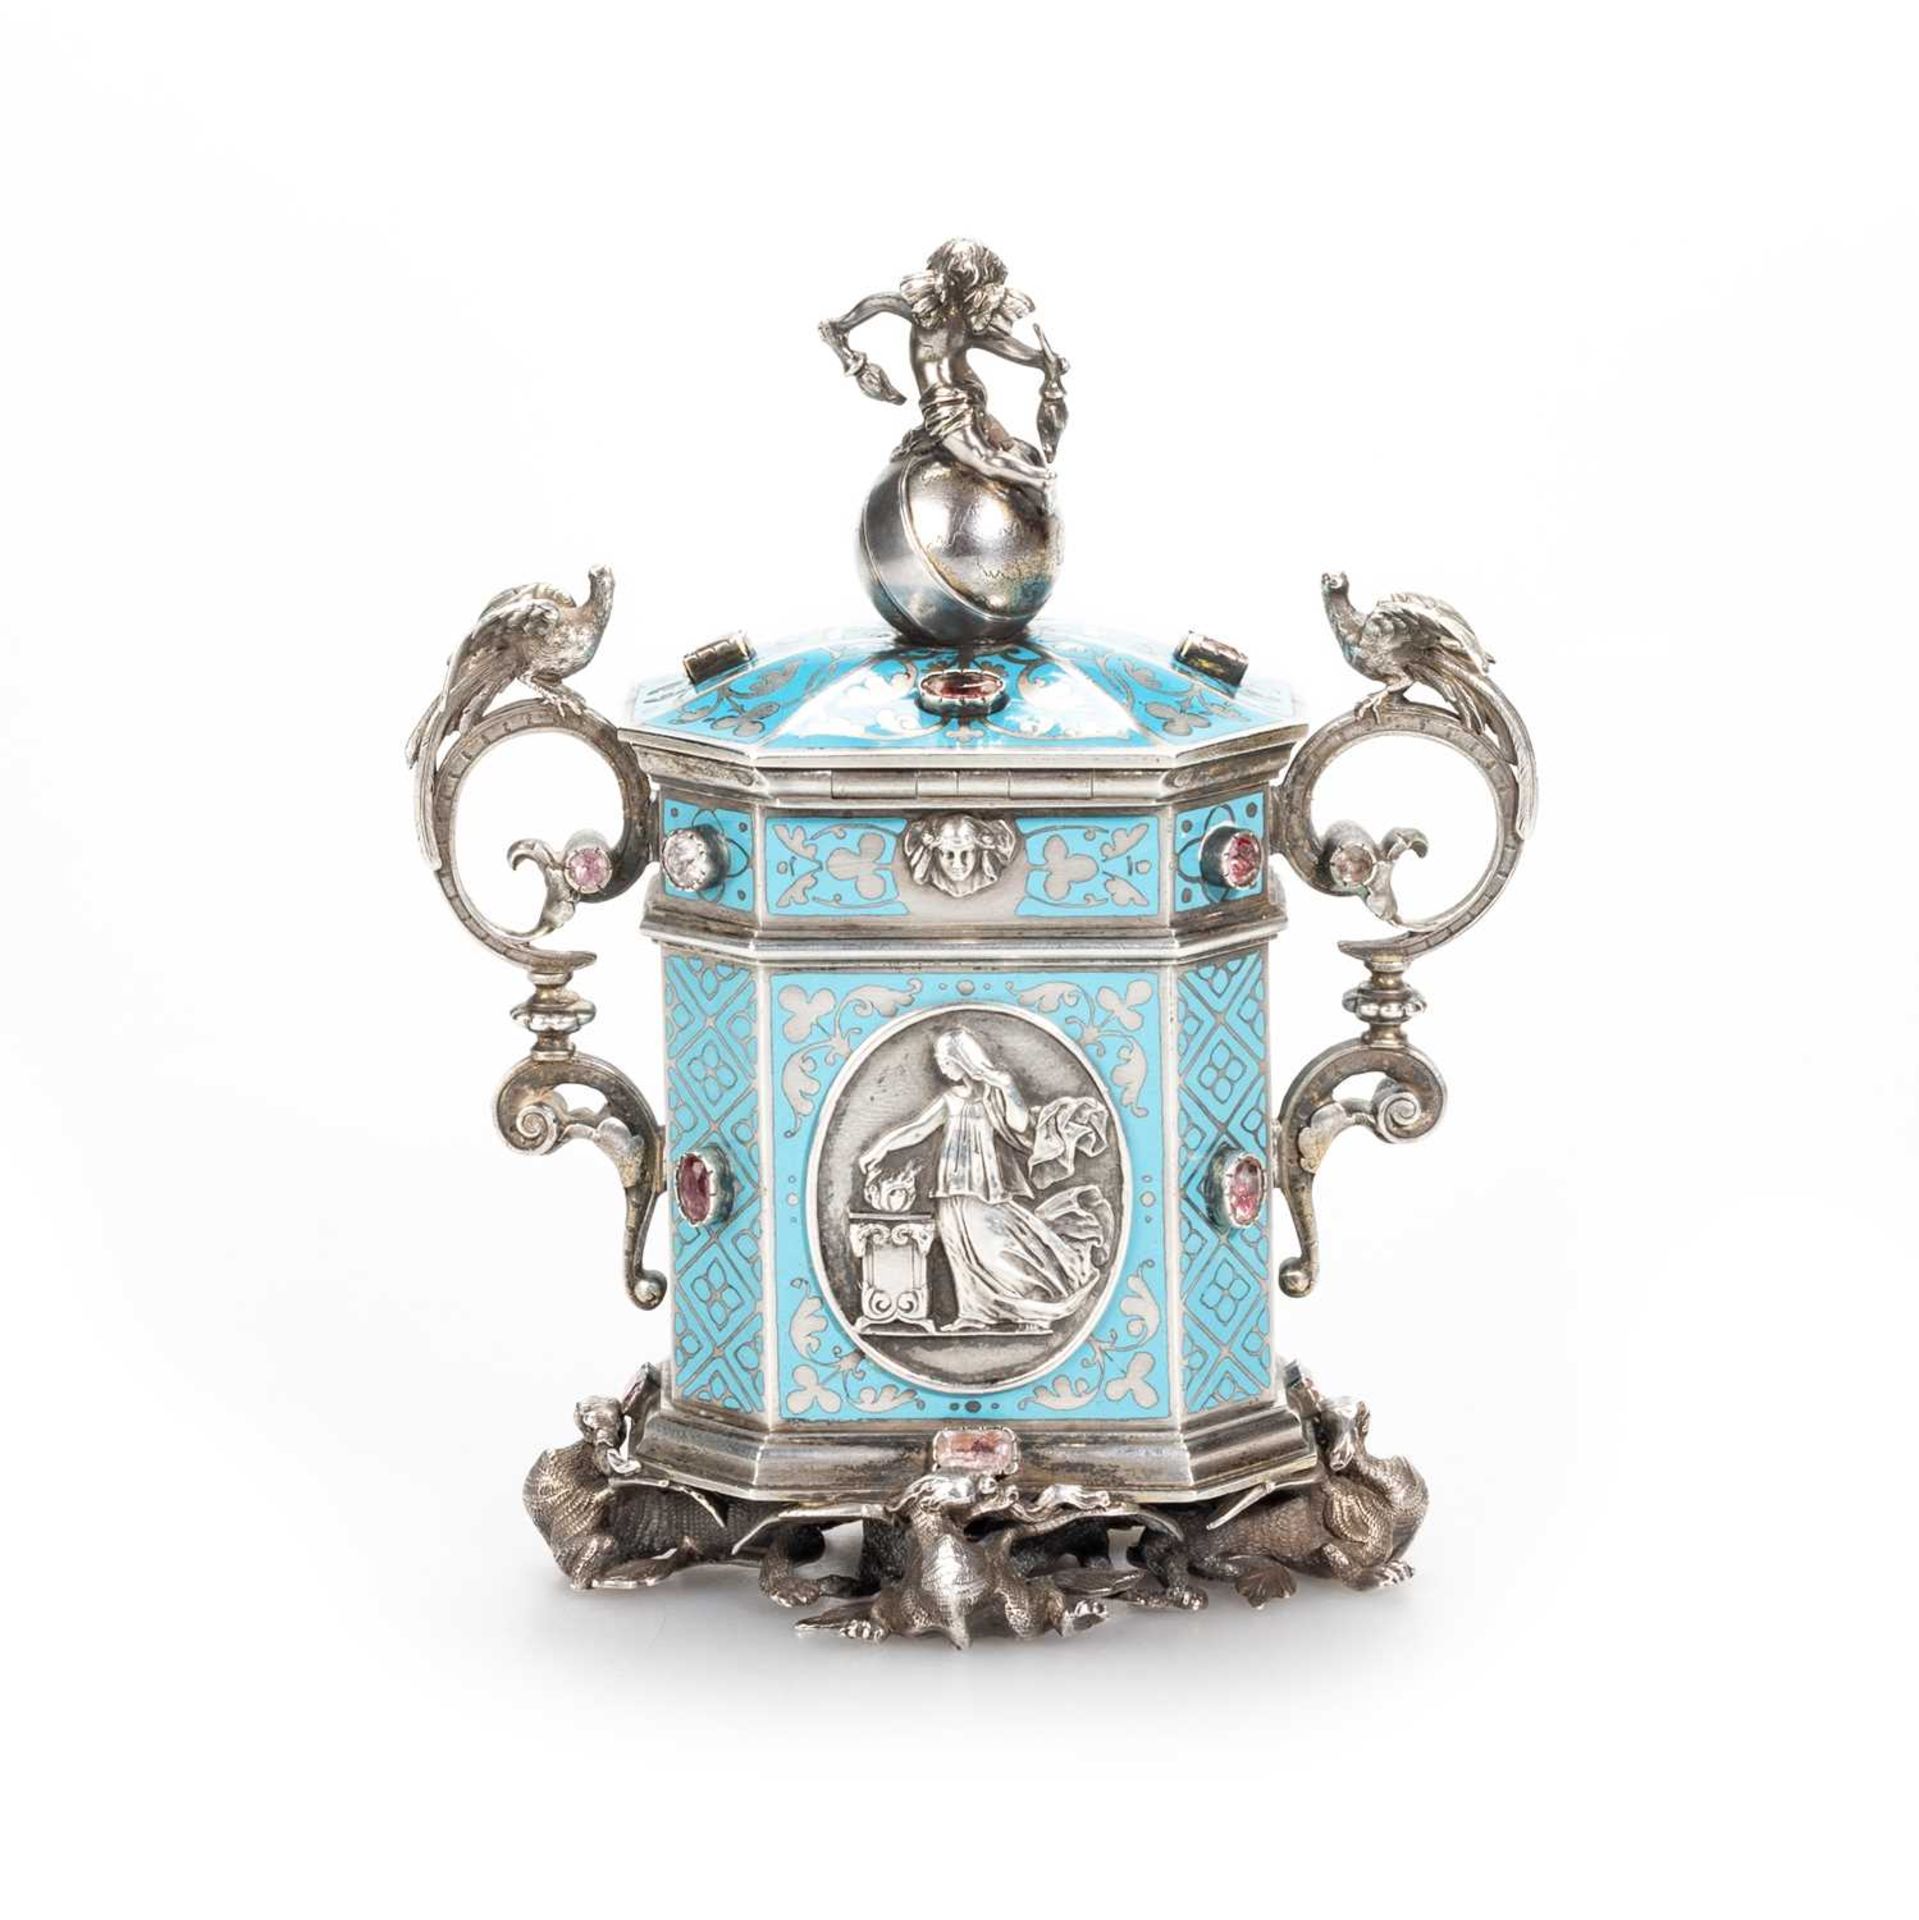 A 19TH CENTURY FRENCH SILVER AND ENAMEL TABLE VESTA, BY FRANÇOIS-DÉSIRÉ FROMENT-MEURICE (1802-1855) - Image 3 of 4